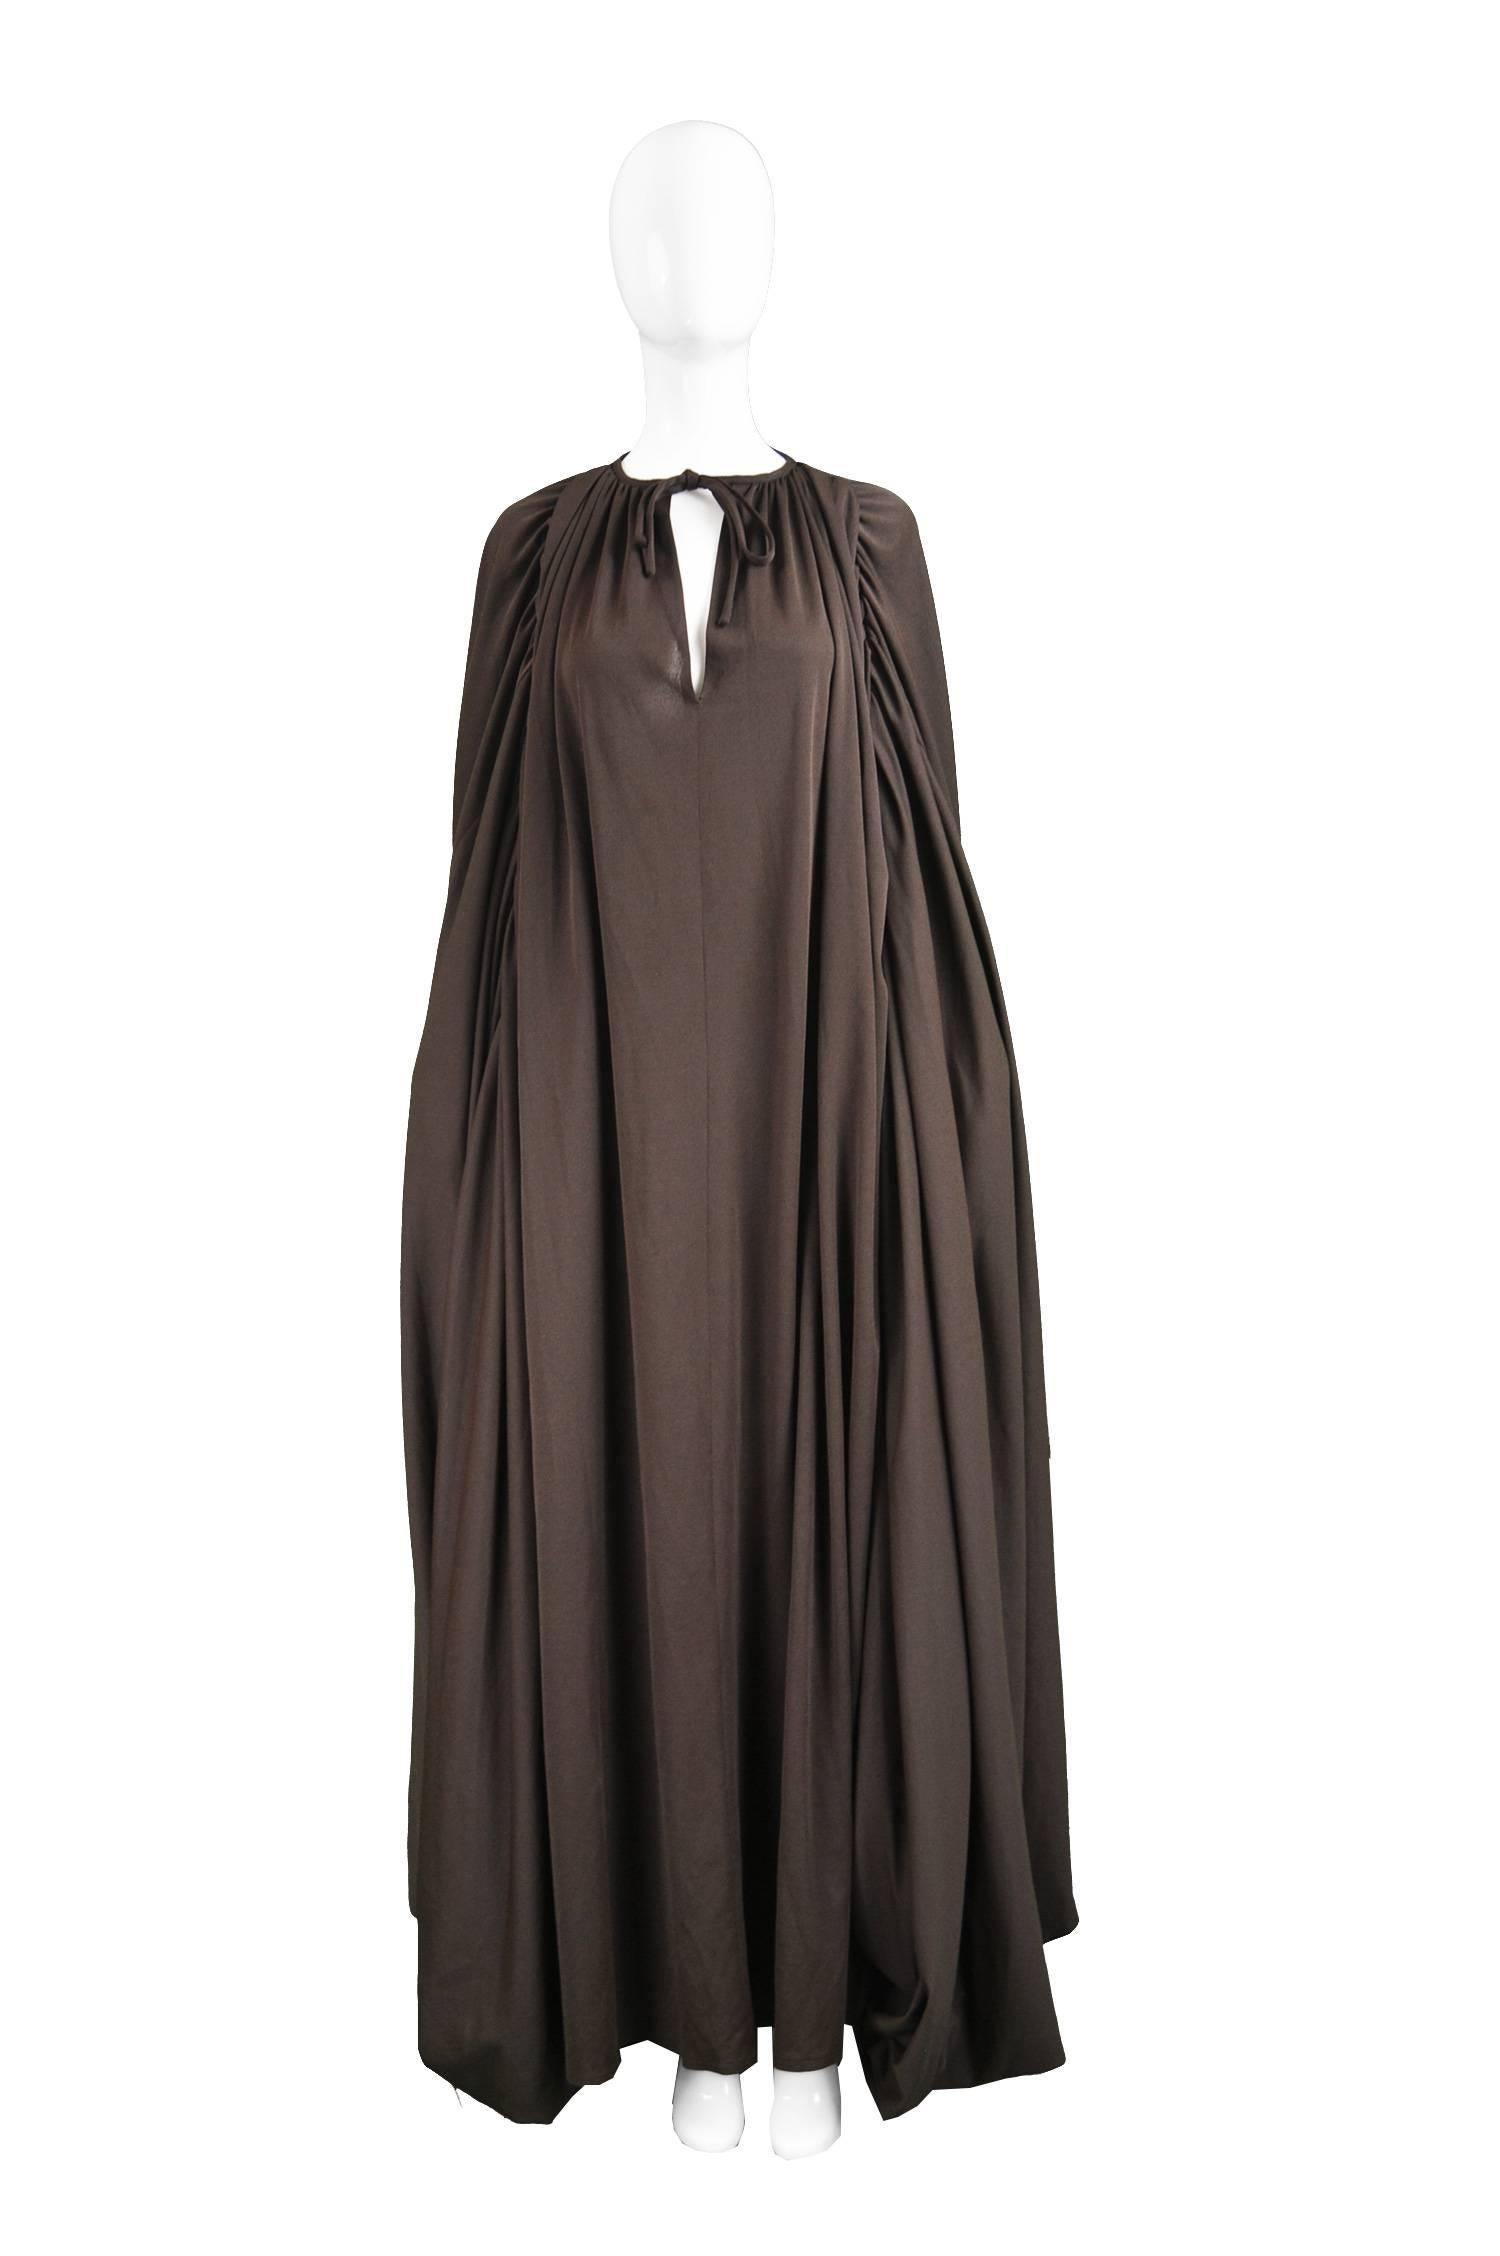 Black Vintage 1970s Kimono Style Brown Maxi Dress with Huge Dramatic Sleeves